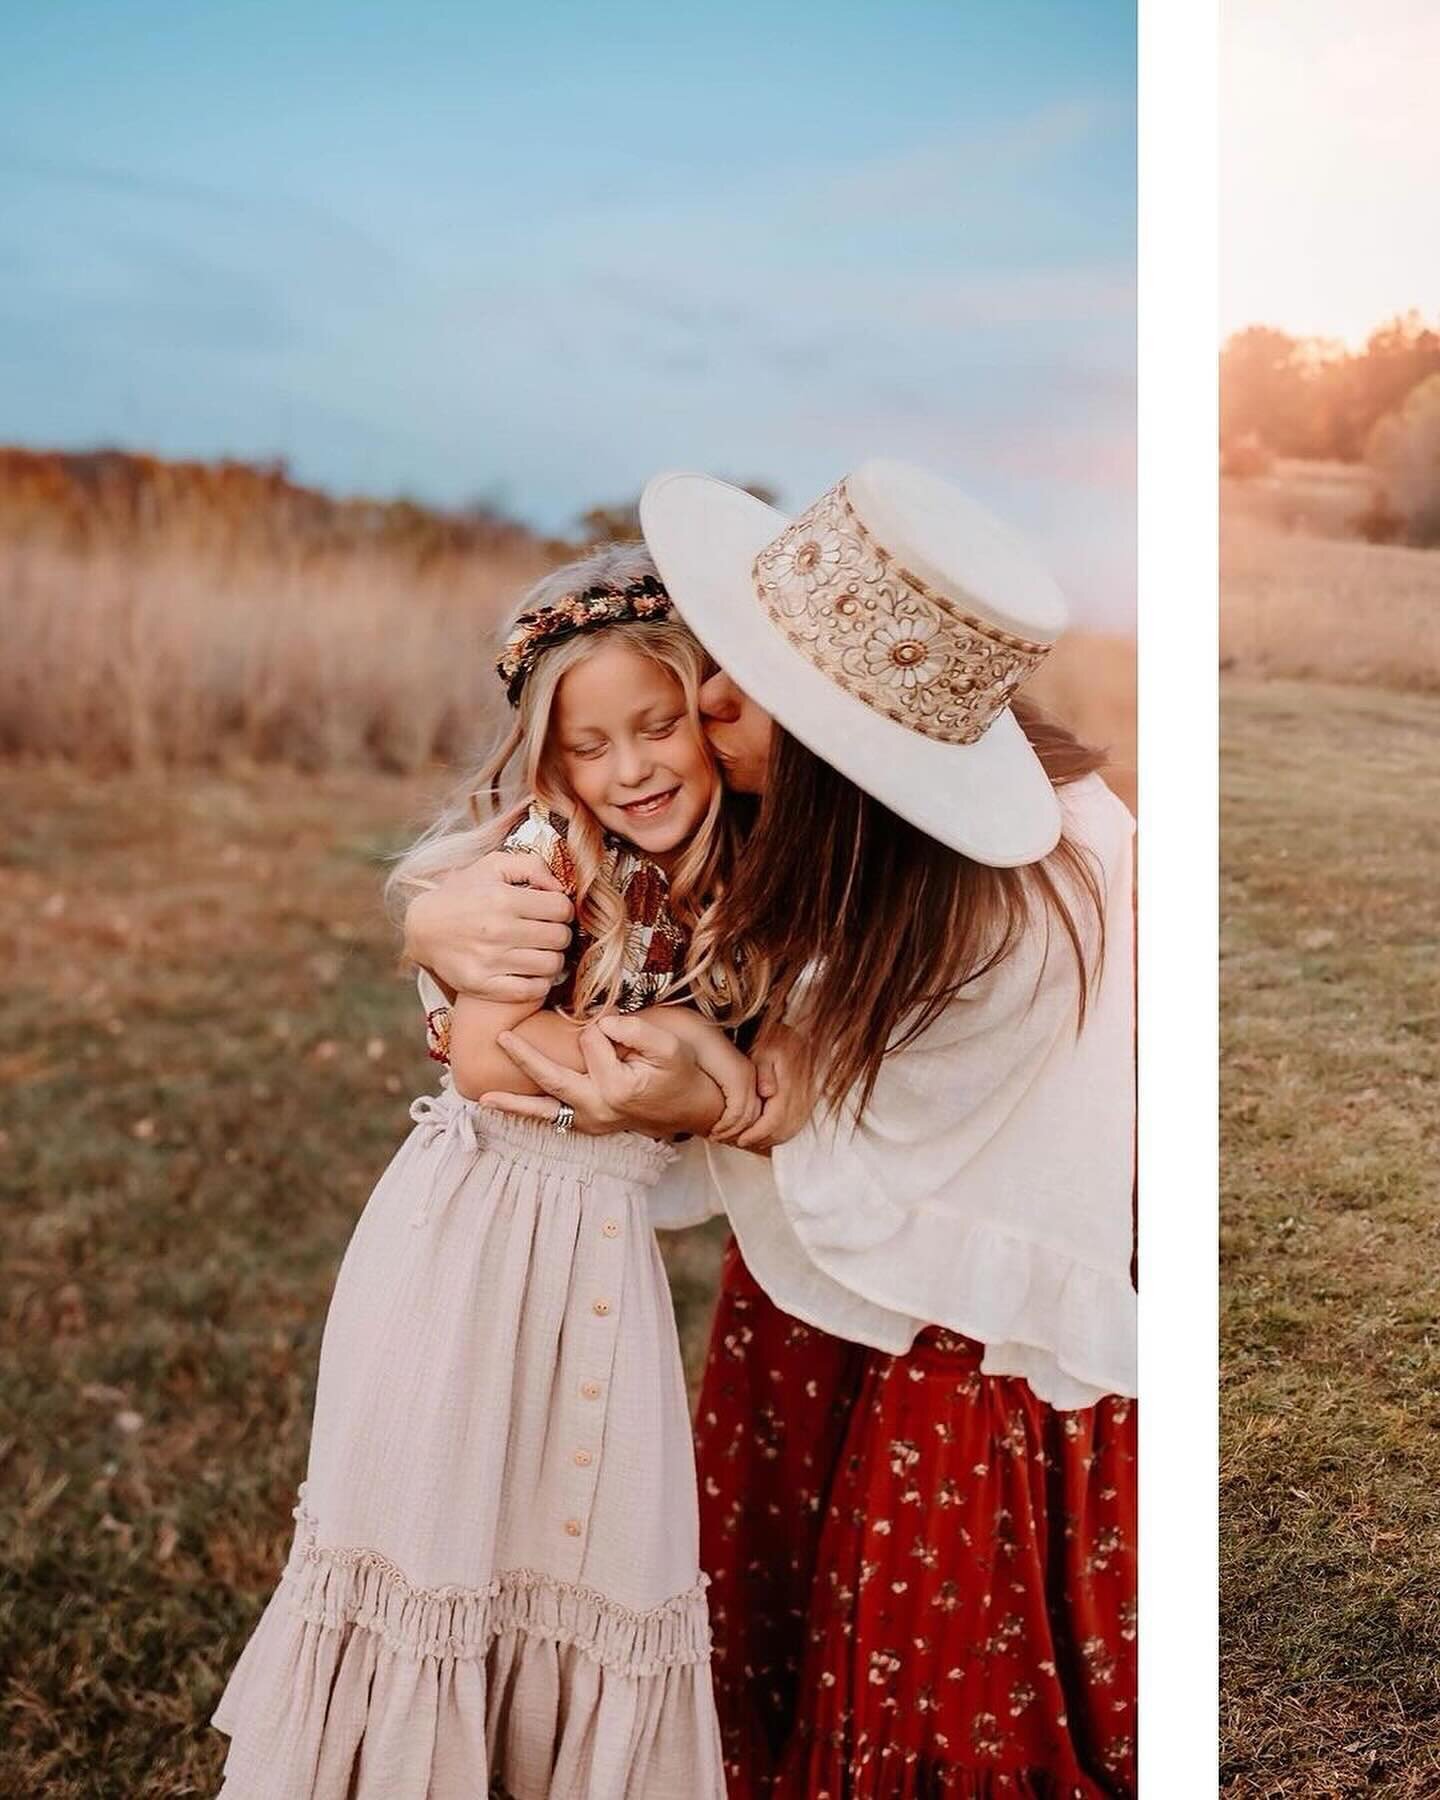 This session is the absolute sweetest! 

Edited with She&rsquo;s the Sun LR presets 
📸 @wonderfullymadephoto

#storytellingvibes #ladytoripresets #enrichedbrushes #boldemotionalcolorful #lightroompreset #childhoodunplugged #momswithcameras #ootd #ca